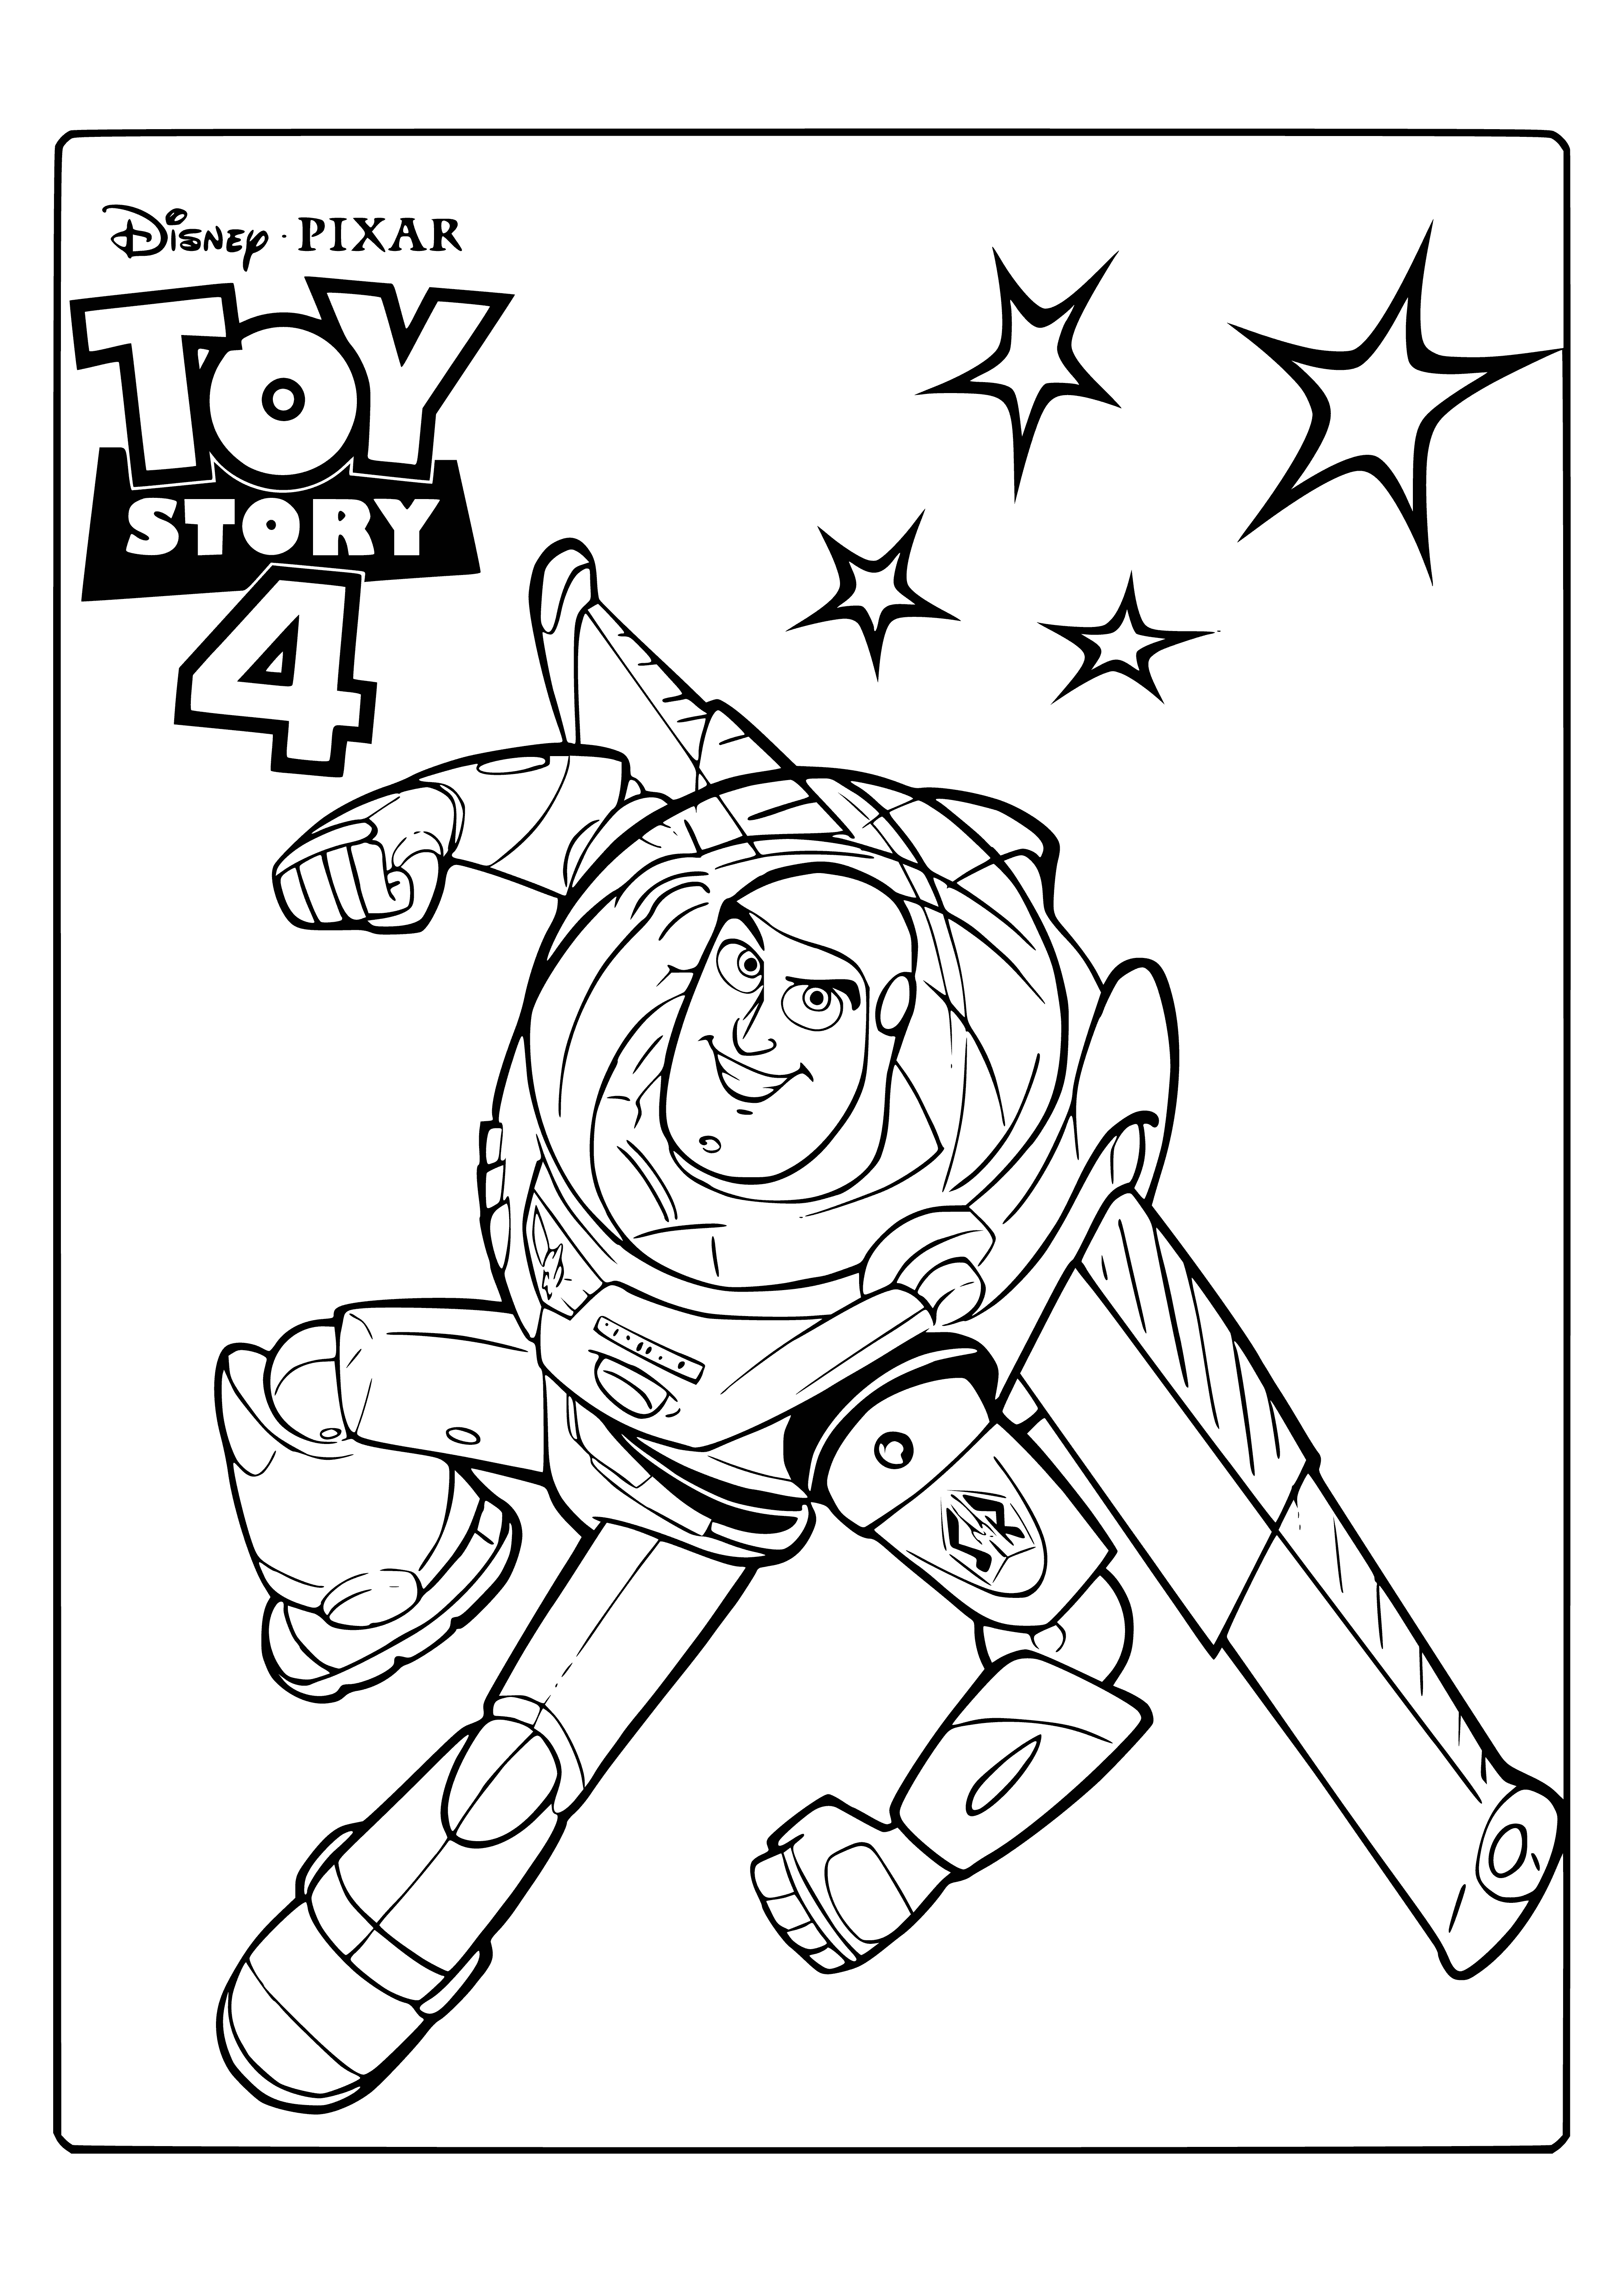 coloring page: Buzz Lightyear in space suit, green helmet, purple visor, white wings and purple blaster gun. Ready for an adventure!